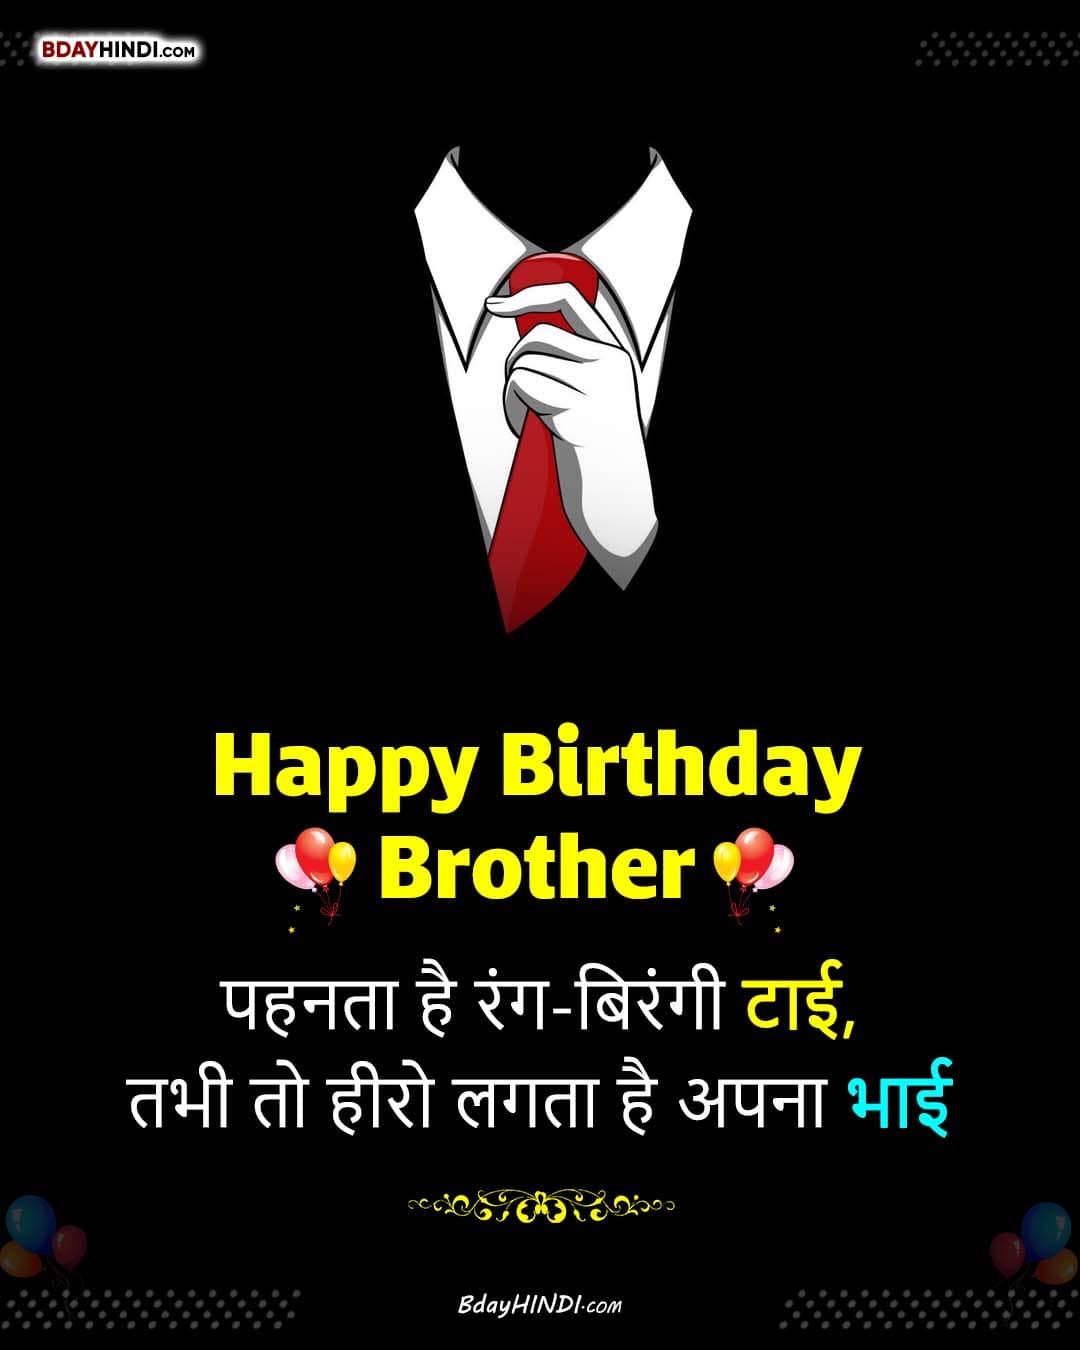 Happy Birthday Wishes for Brother Hindi